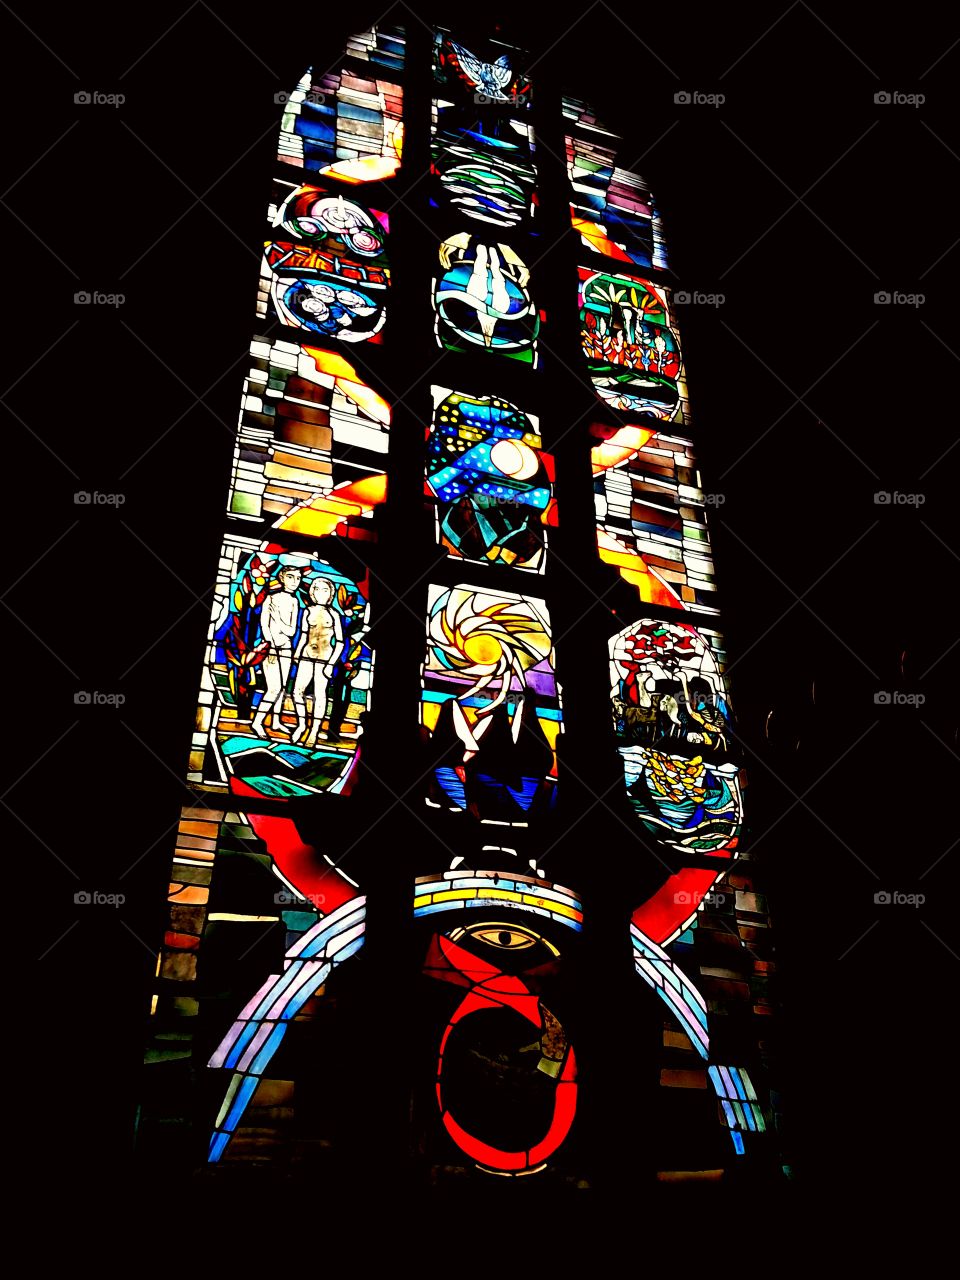 Darkness and Light telling a story
Beautiful stained glass window in the "Marien Kirche" Flensburg Germany